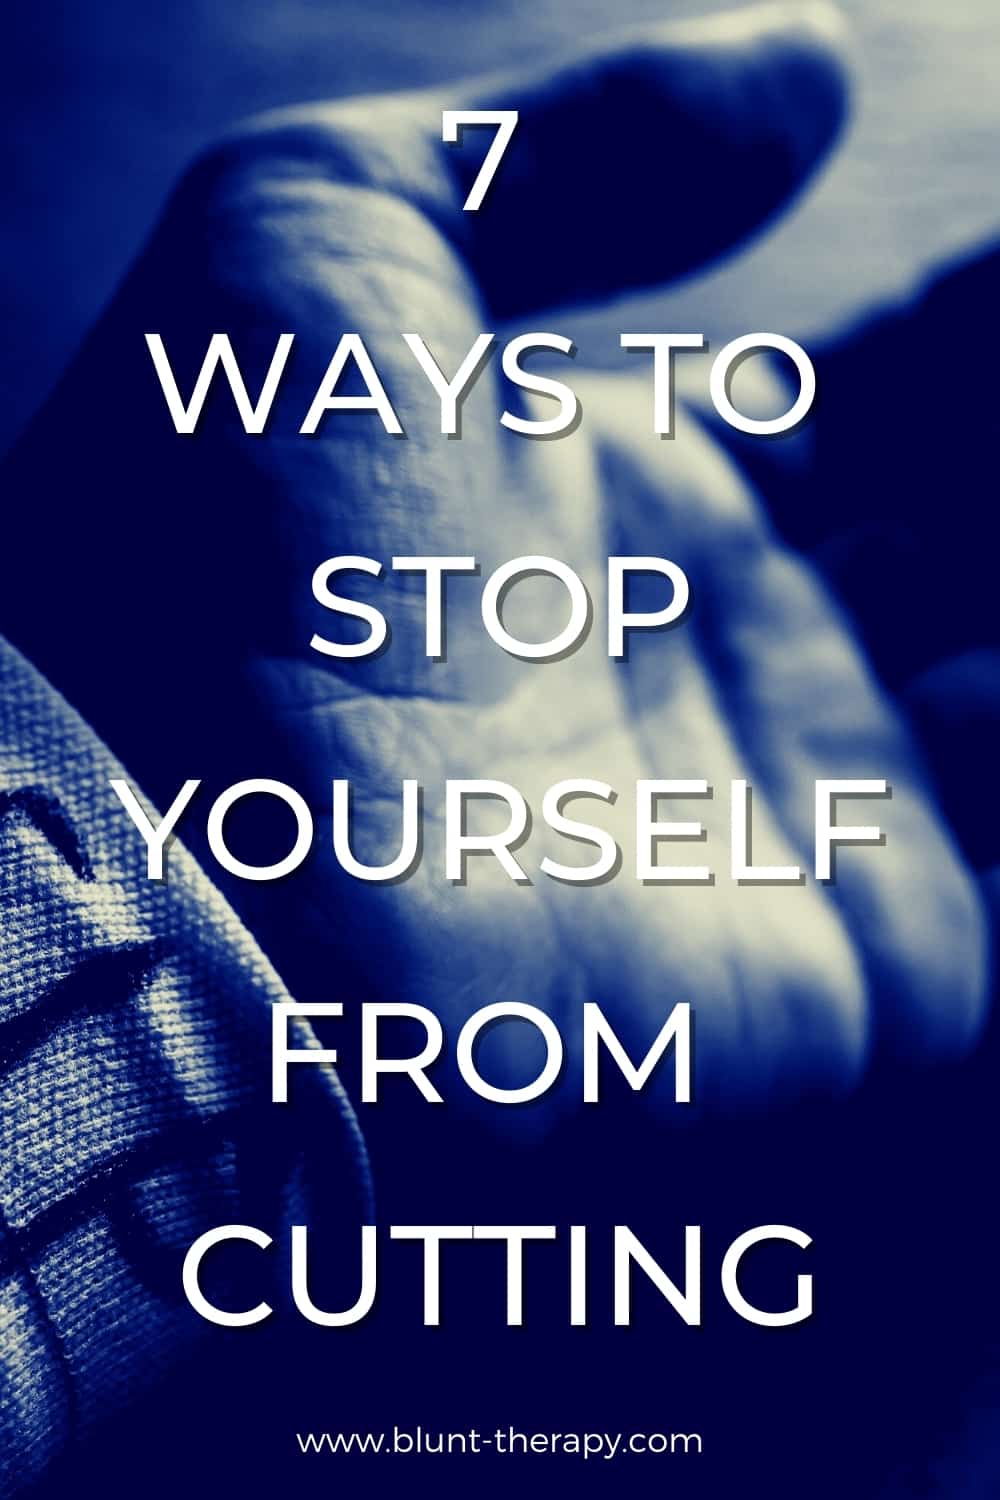 How To Stop Cutting: 7 Self-Harm Reduction Techniques That Actually Work